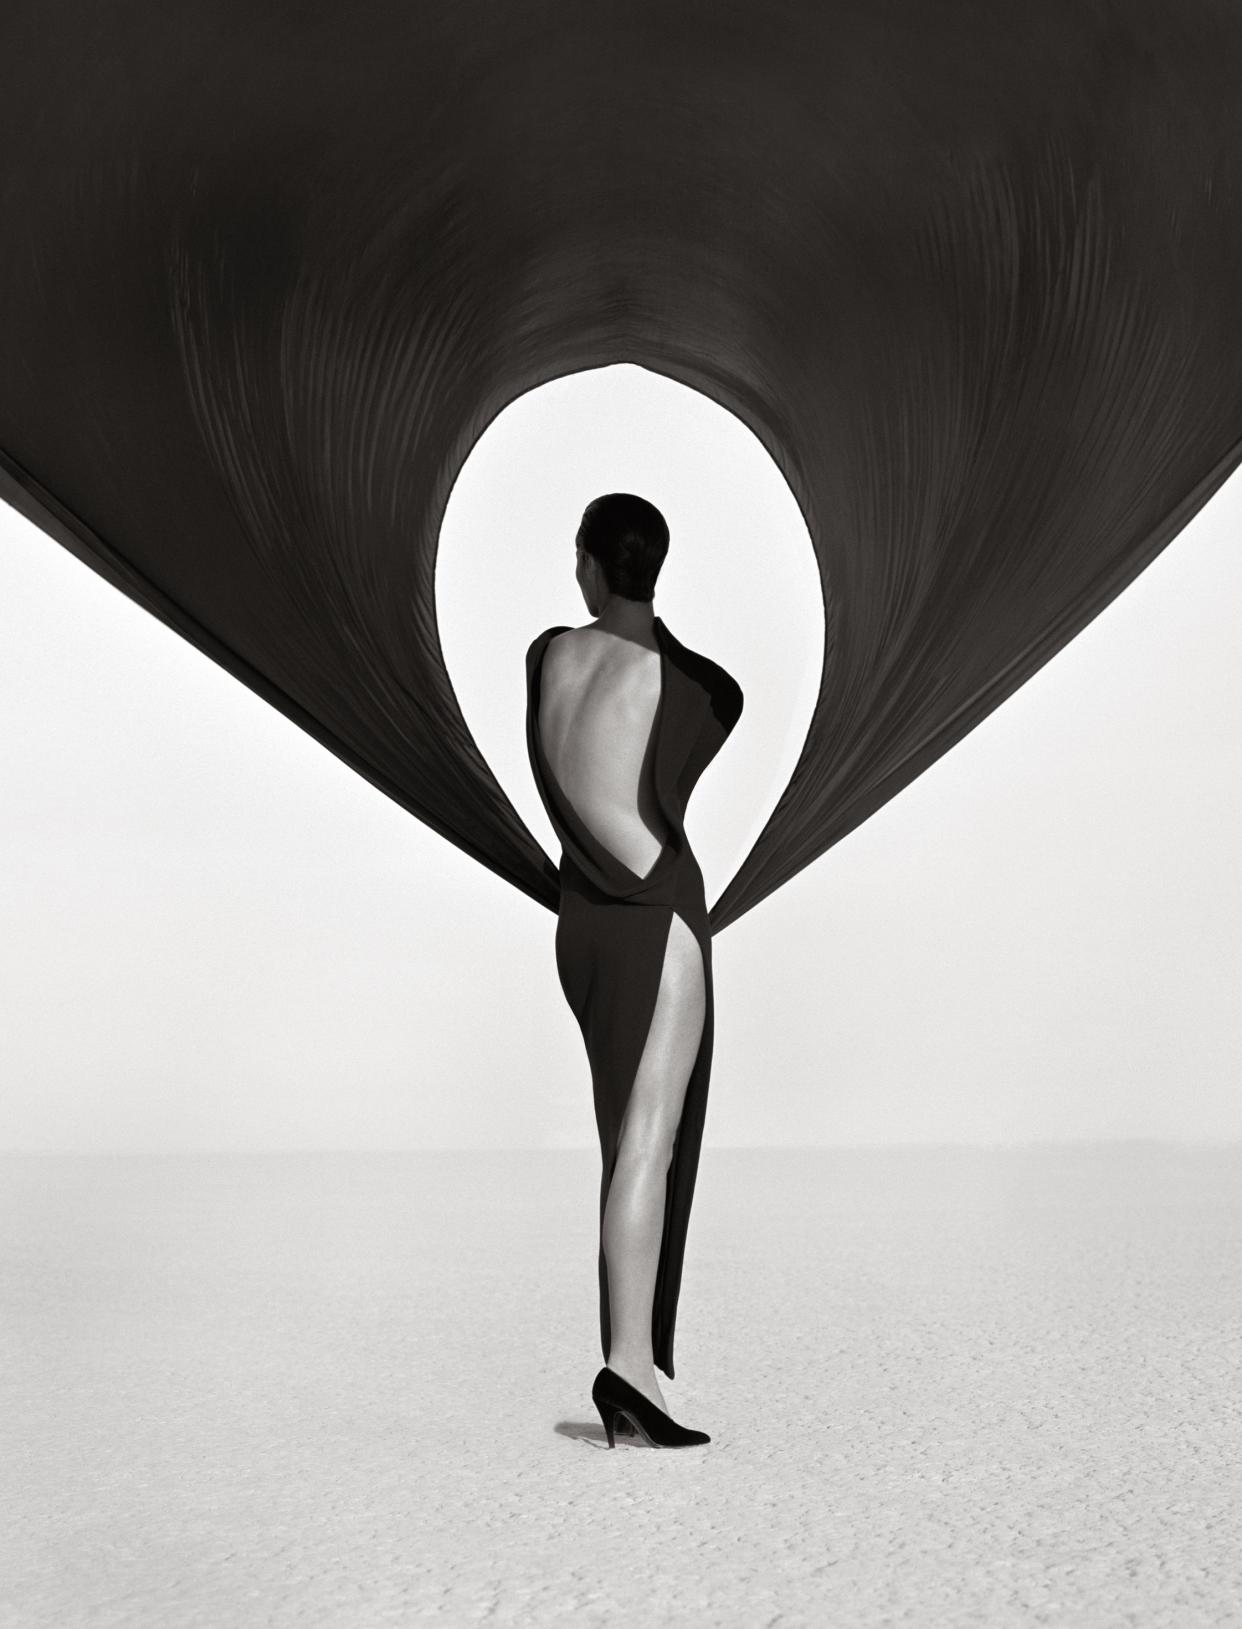 Versace Dress (Back View), El Mirage 1990 (Herb Ritts Foundation, Courtesy of Fahey Klein Gallery, Los Angeles/PA)